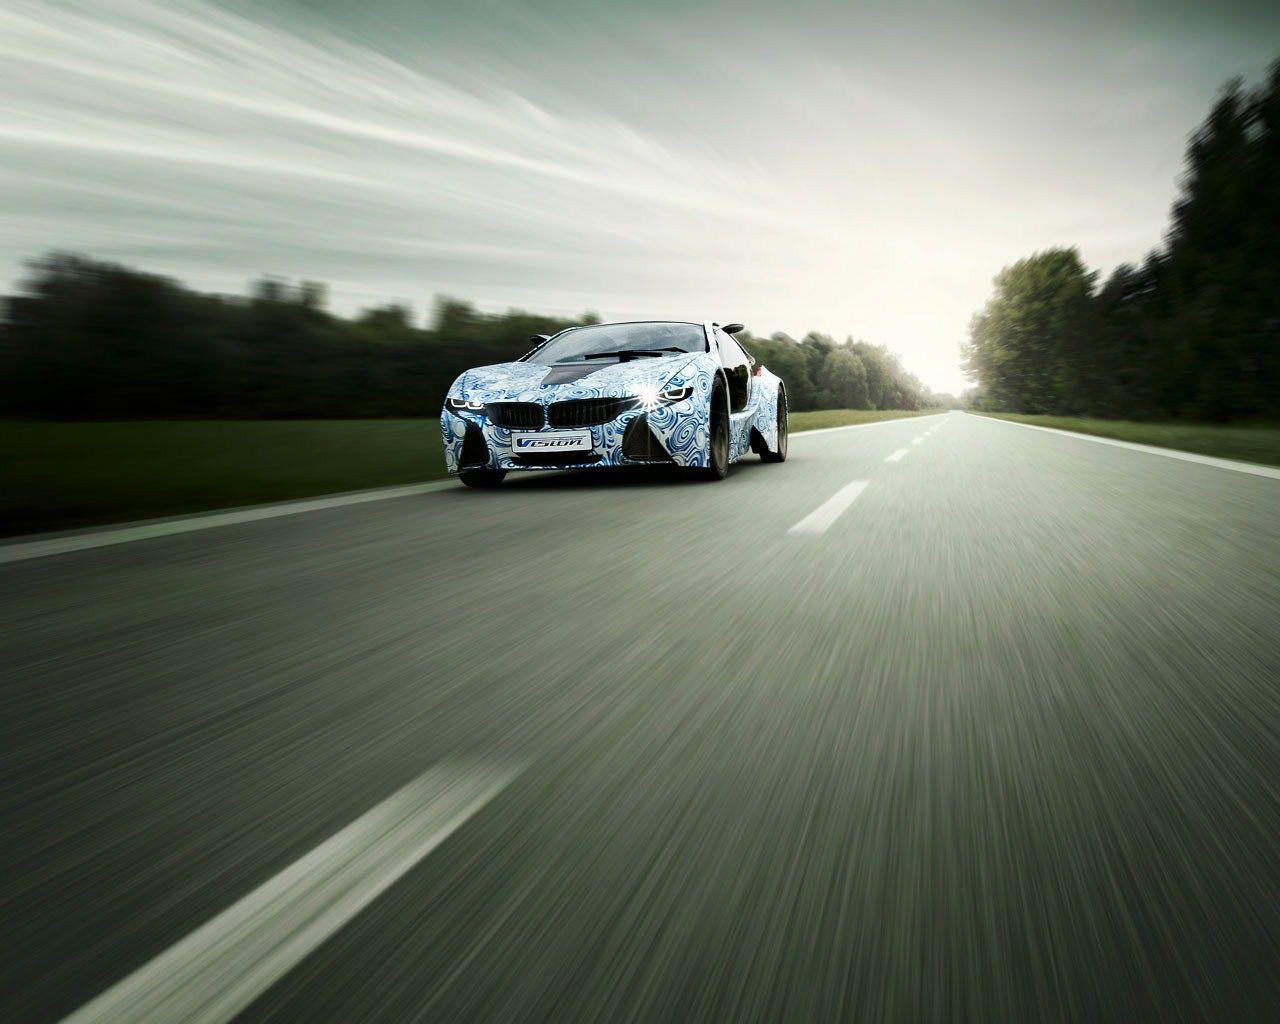 New Wallpaper and Videos: BMW Vision EfficientDynamics